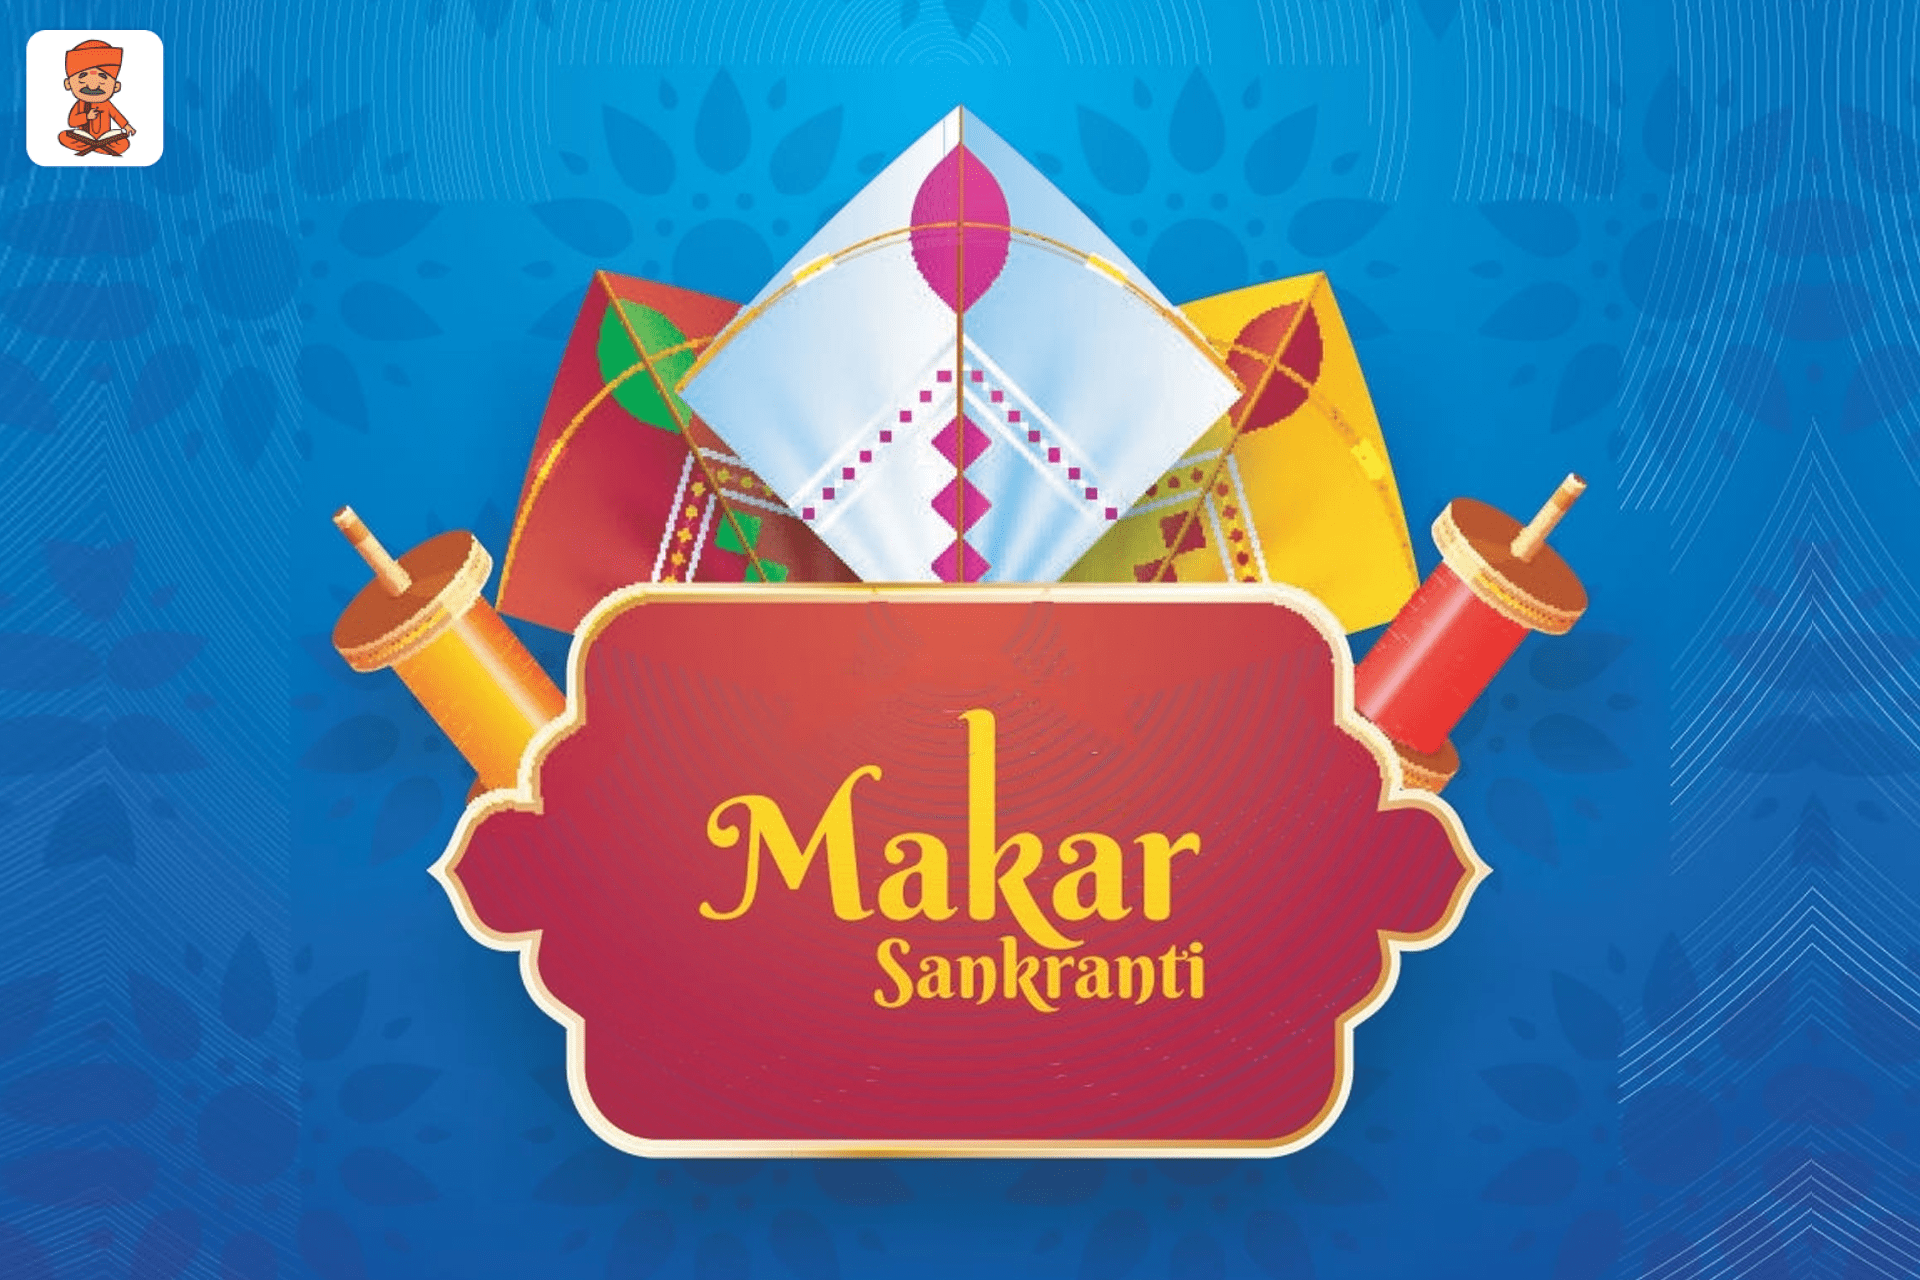 Makar Sankranti 2022: What Is Special About Makar Sankranti? What Is Its Importance?